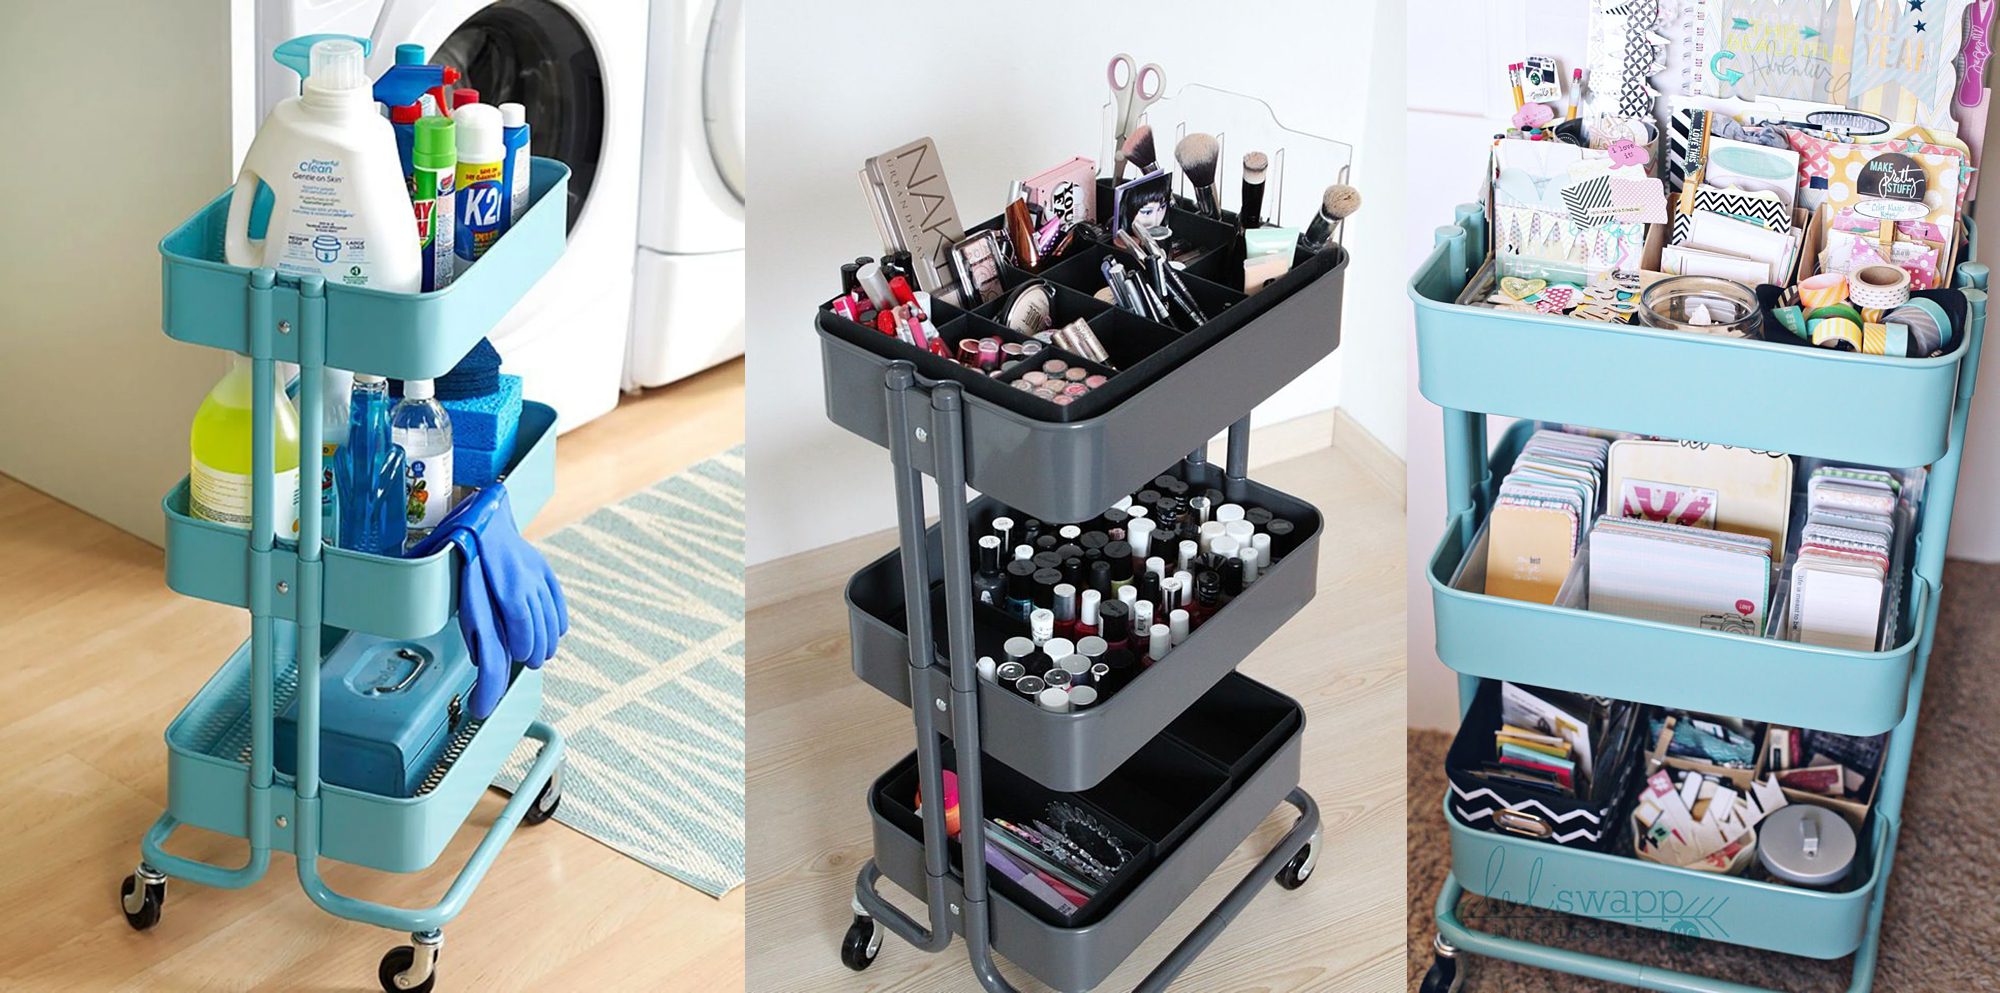 Ways to use a utility cart to stay organized | Reaj Roberts Photography